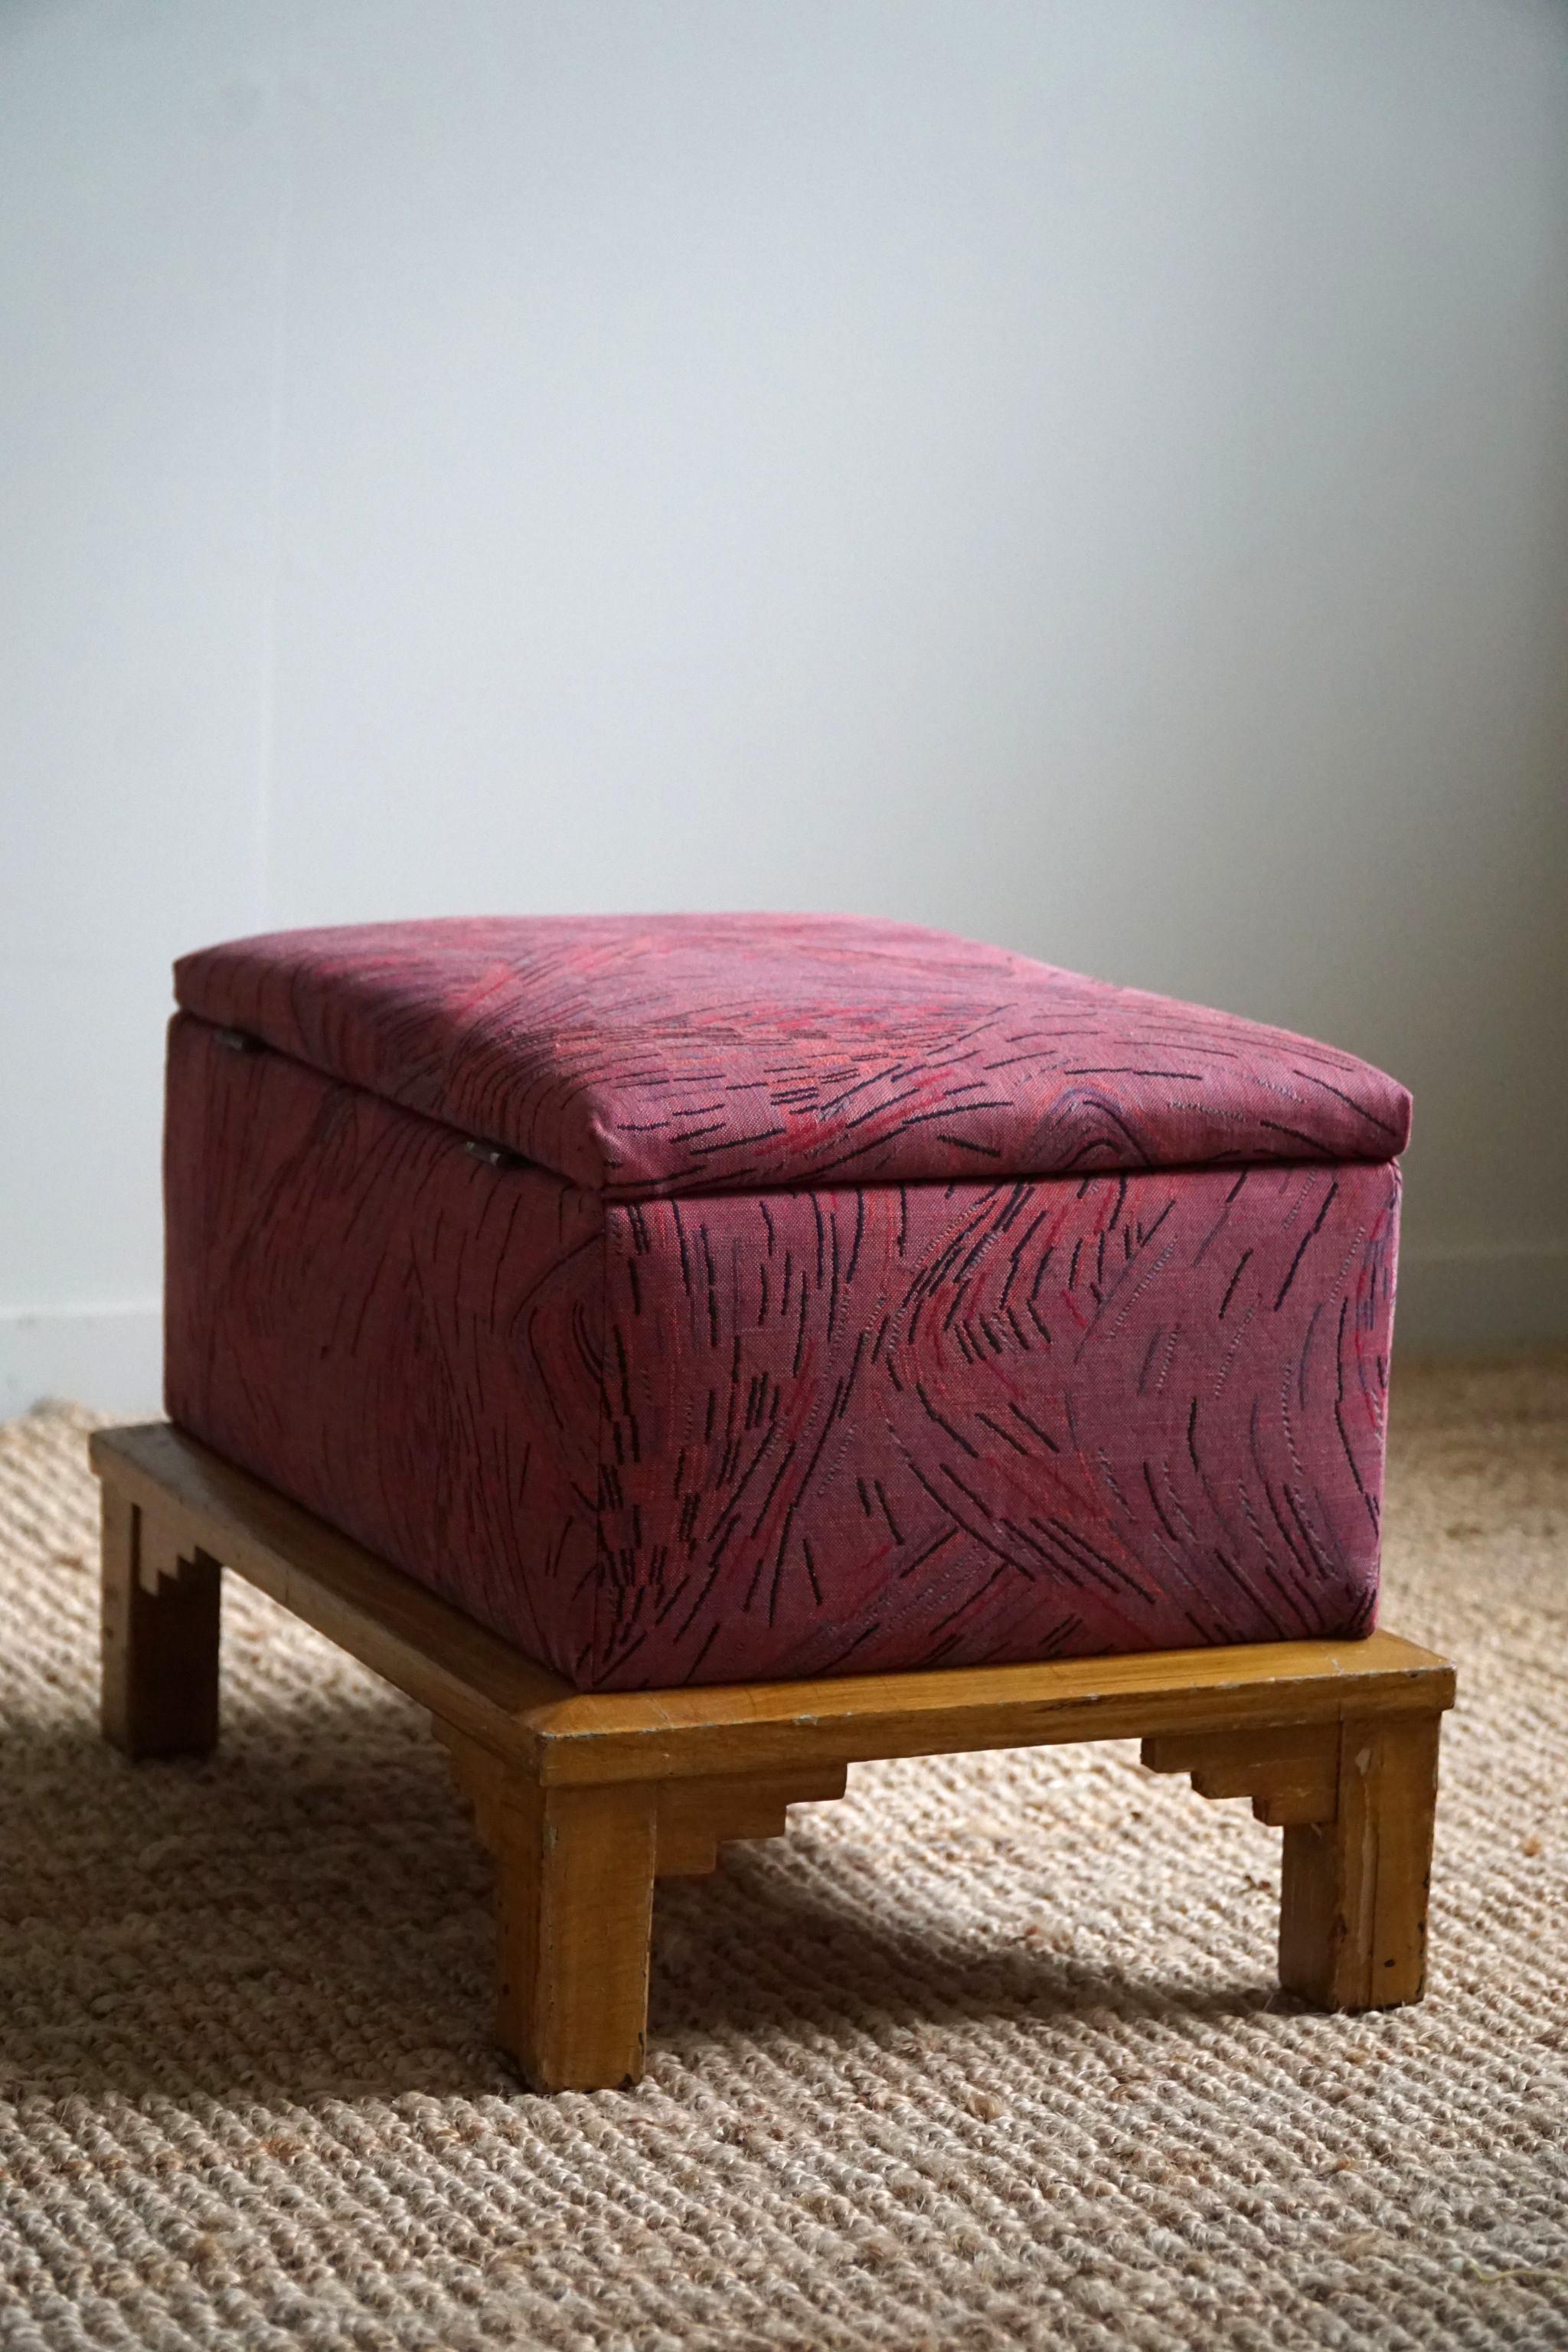 French Art Deco, Sculptural Stool with Storage, Reupholstered, Made in the 1940s For Sale 4